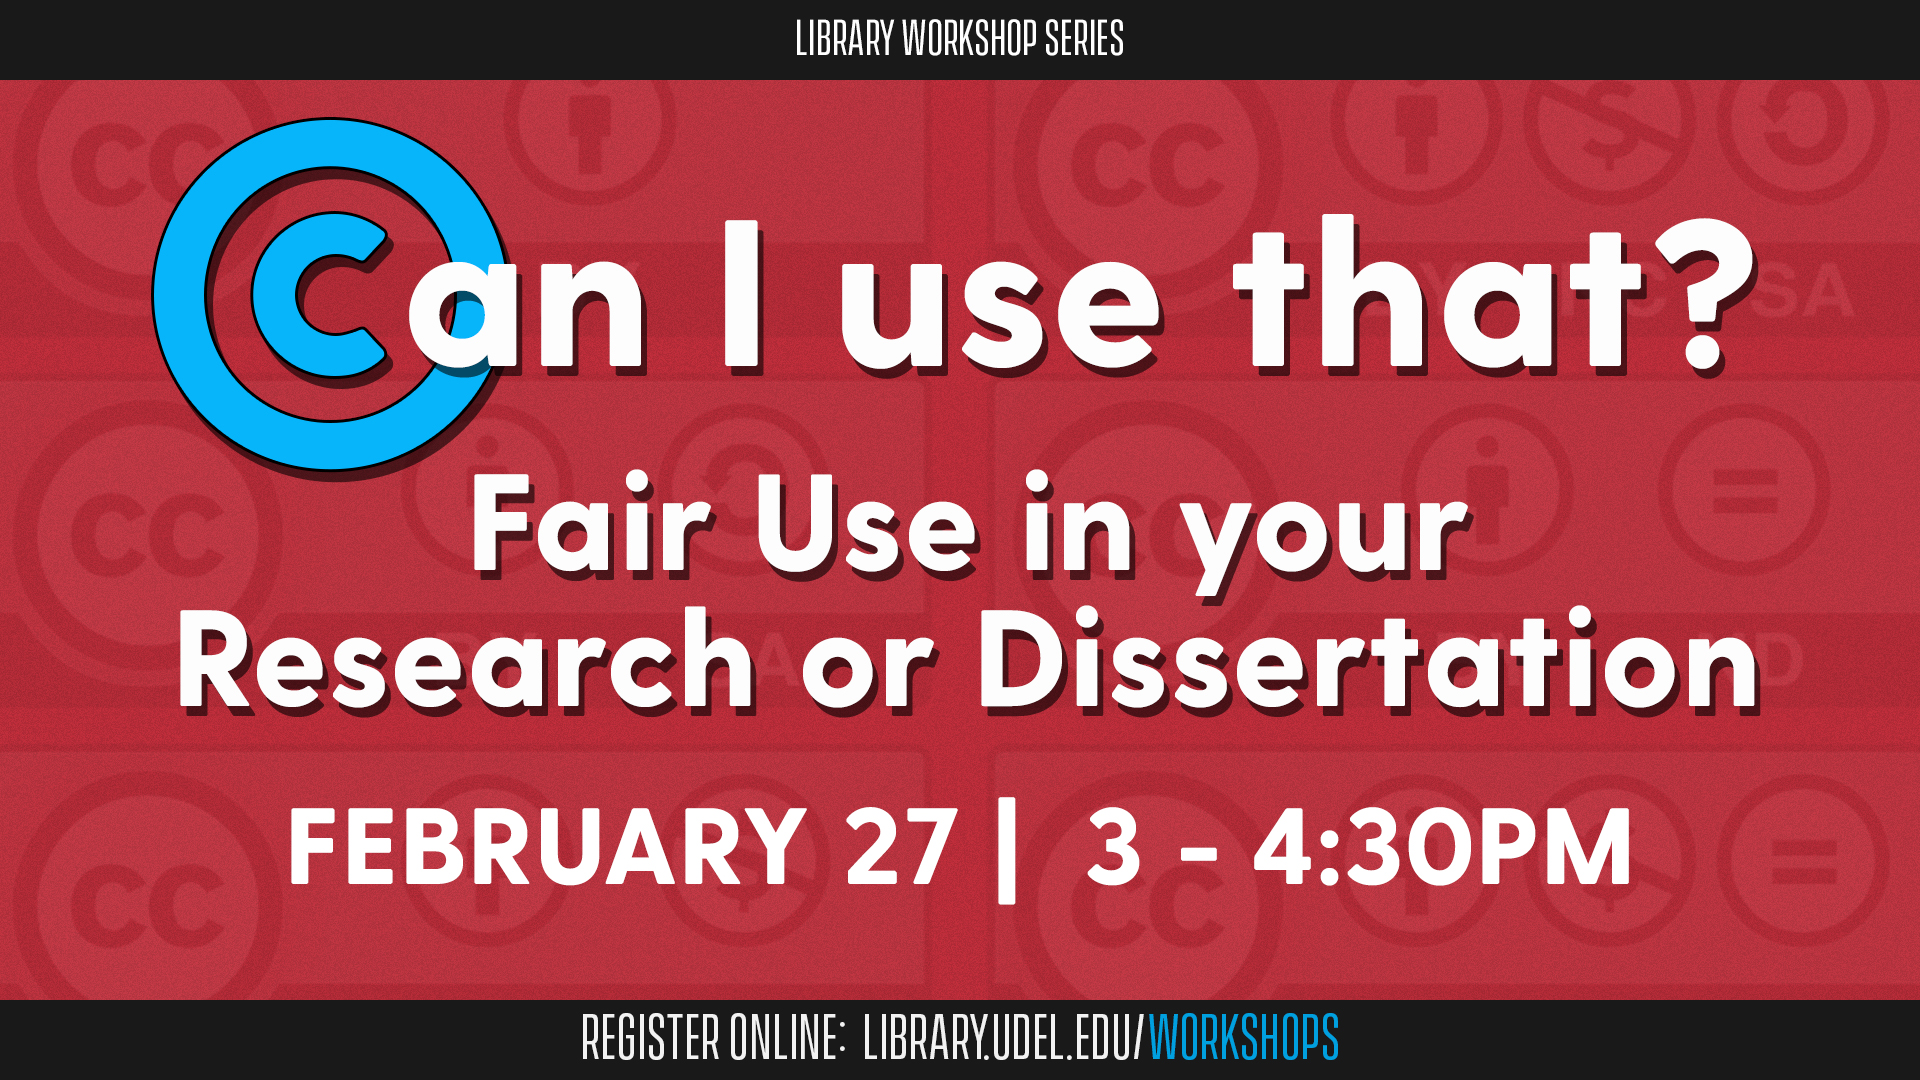 Promotional image for Can I Use That? Fair Use in Your Research or Dissertation